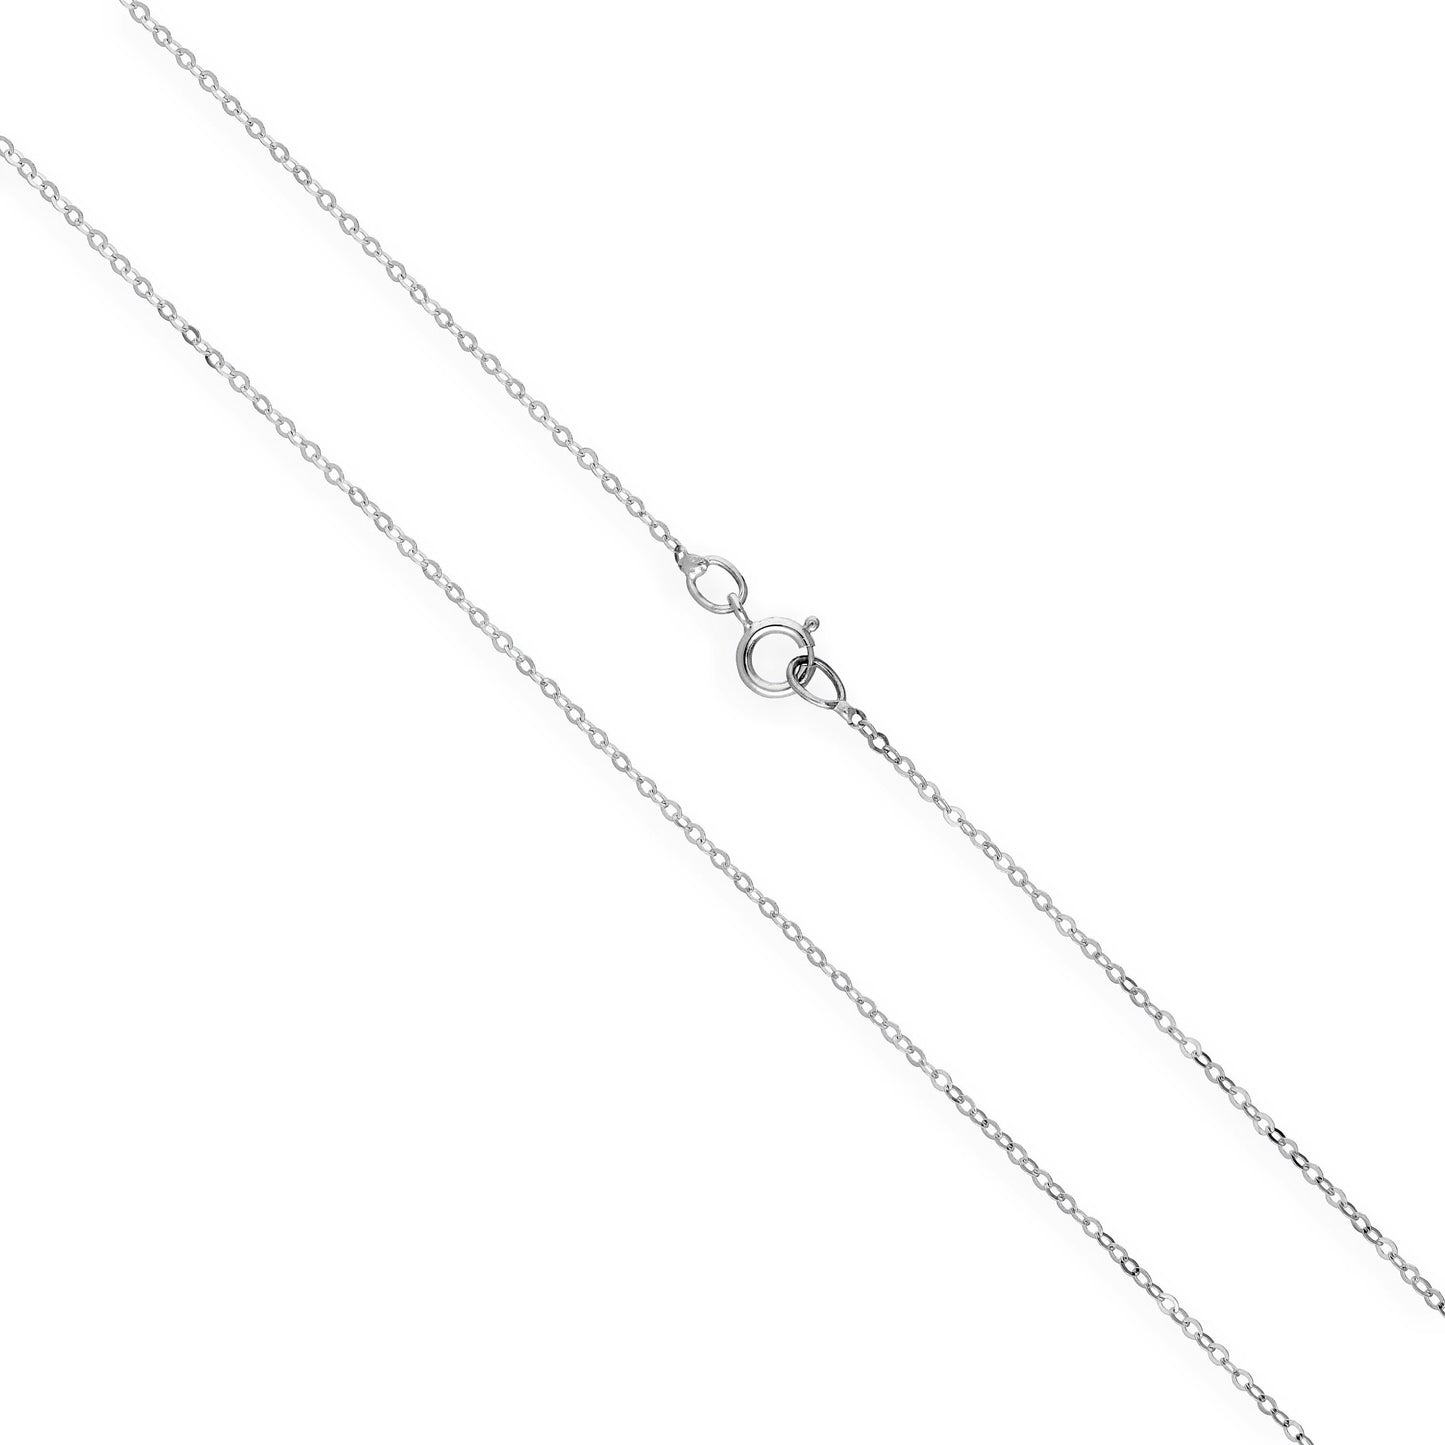 9ct White Gold Hammered Trace Chain 16 - 24 Inches